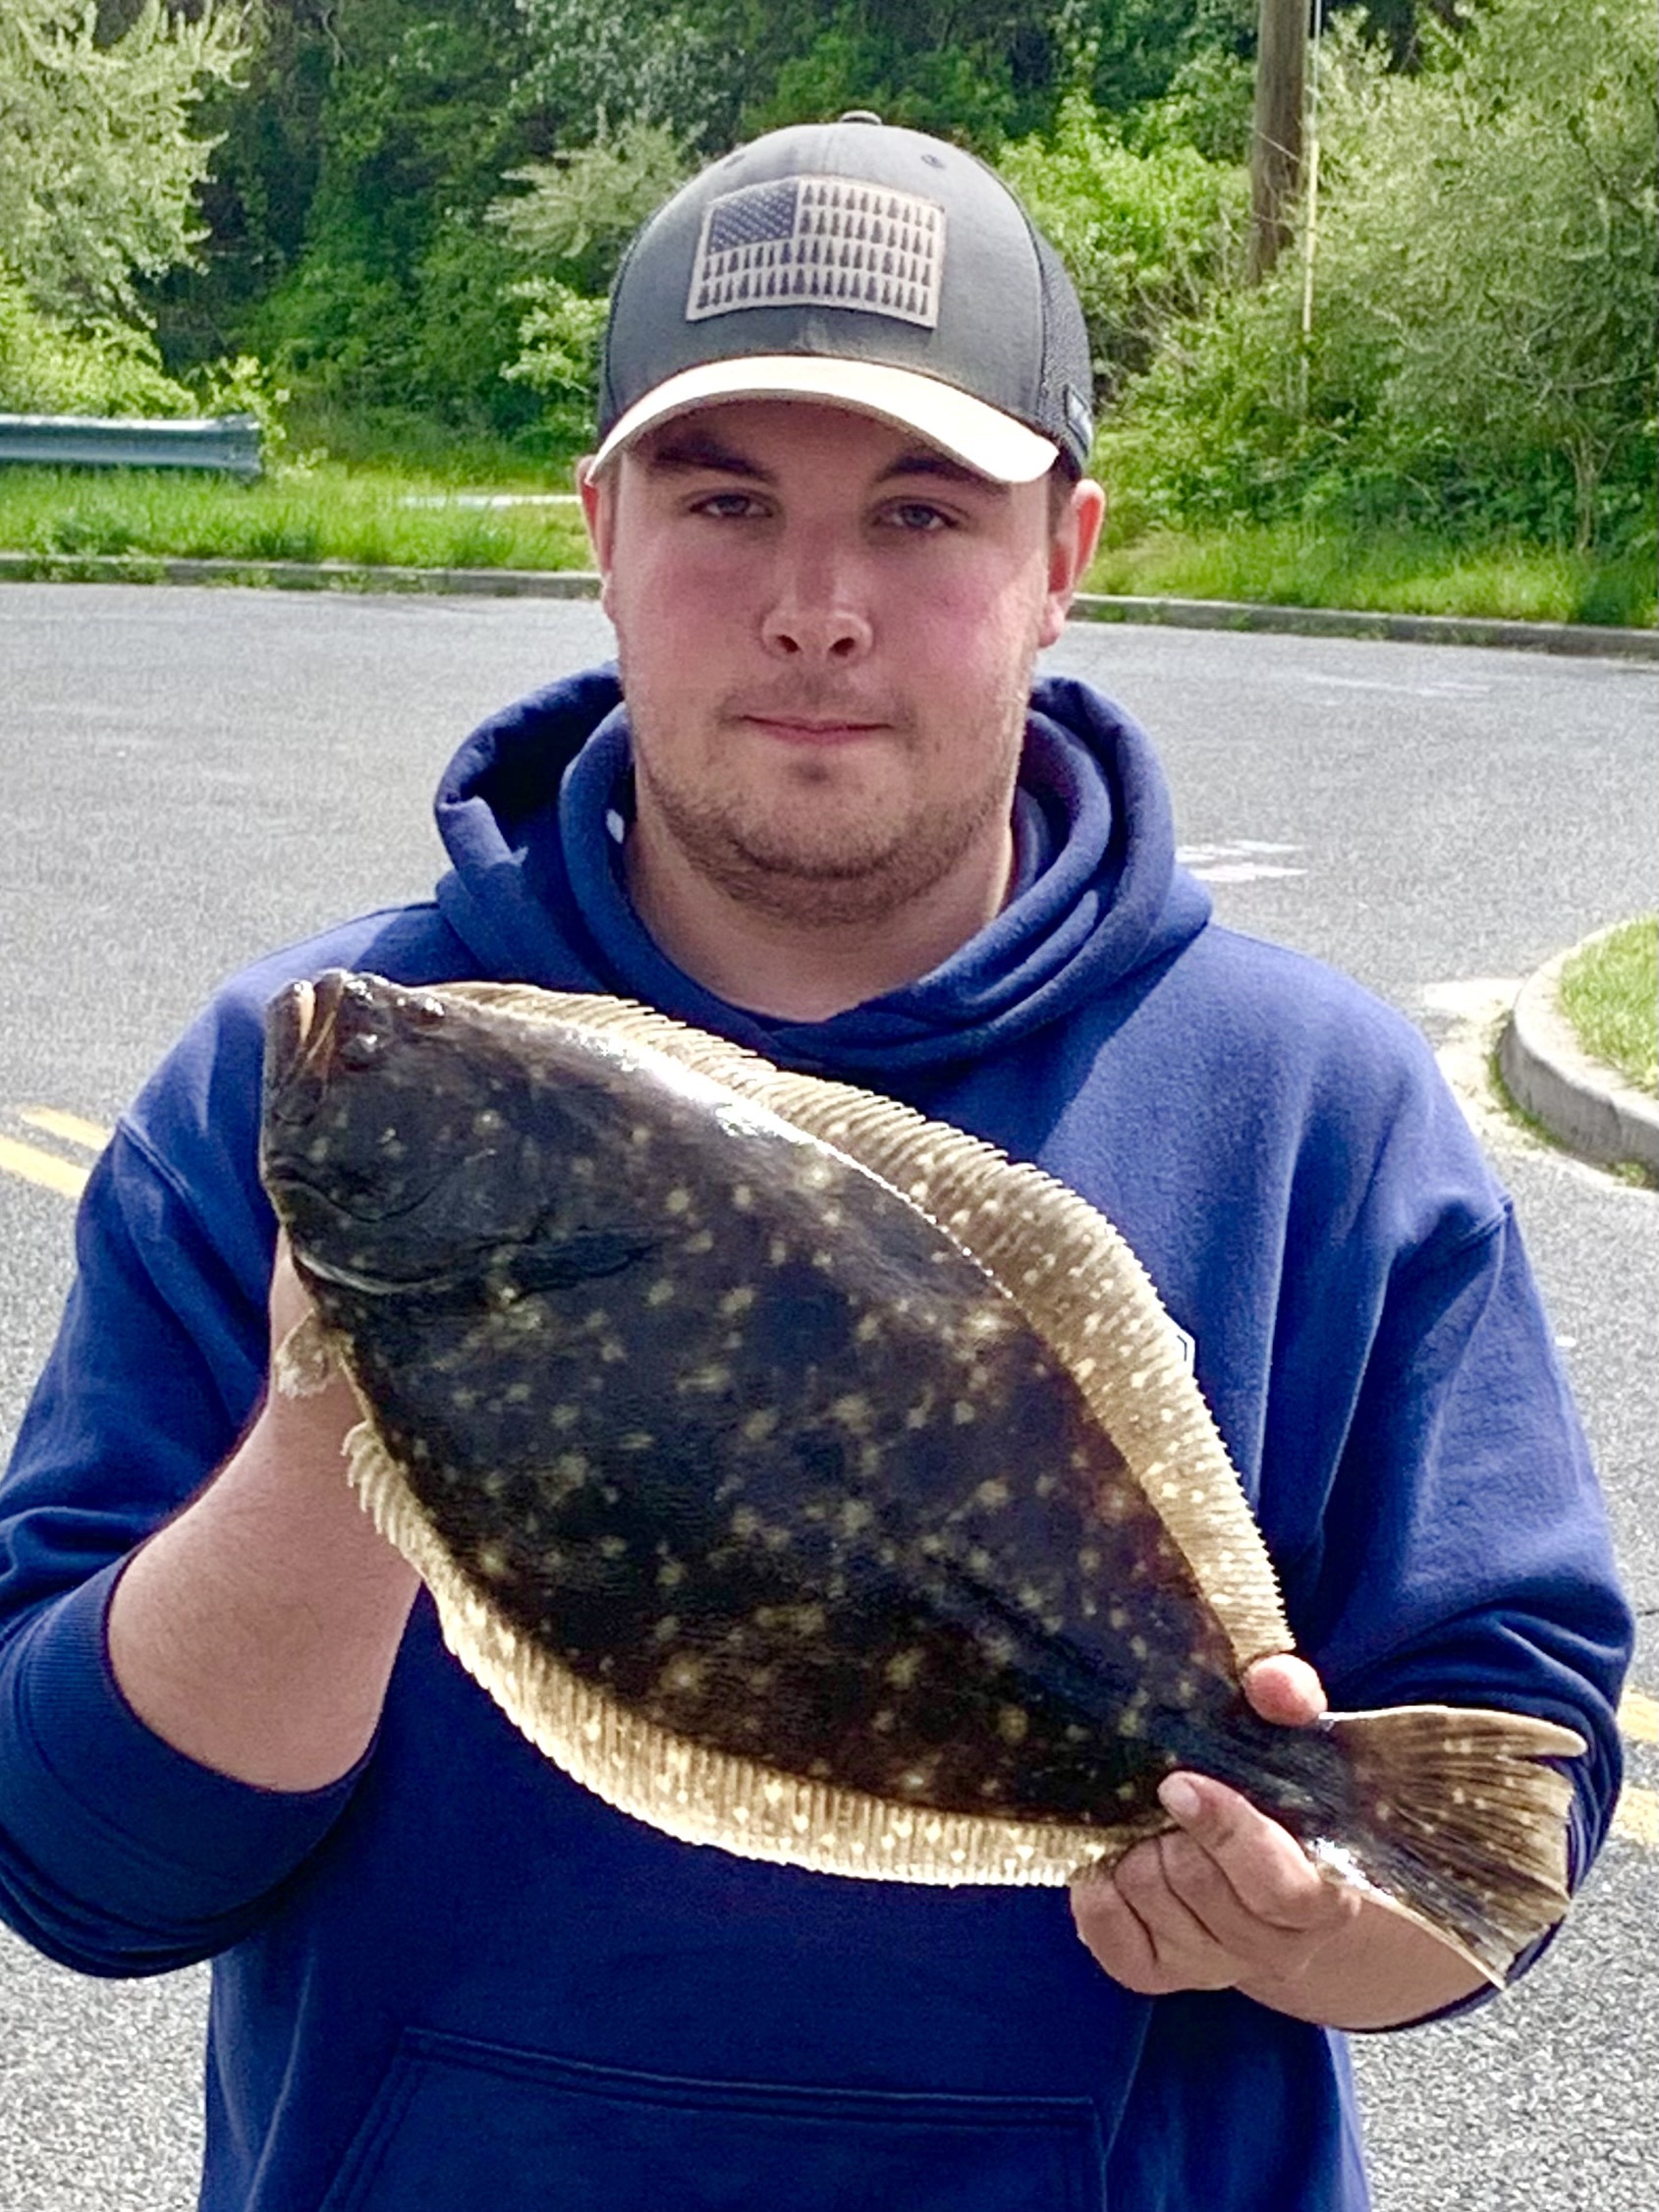 Chris Brenner Jr. with a nice keeper fluke from the Shinnecock Canal.